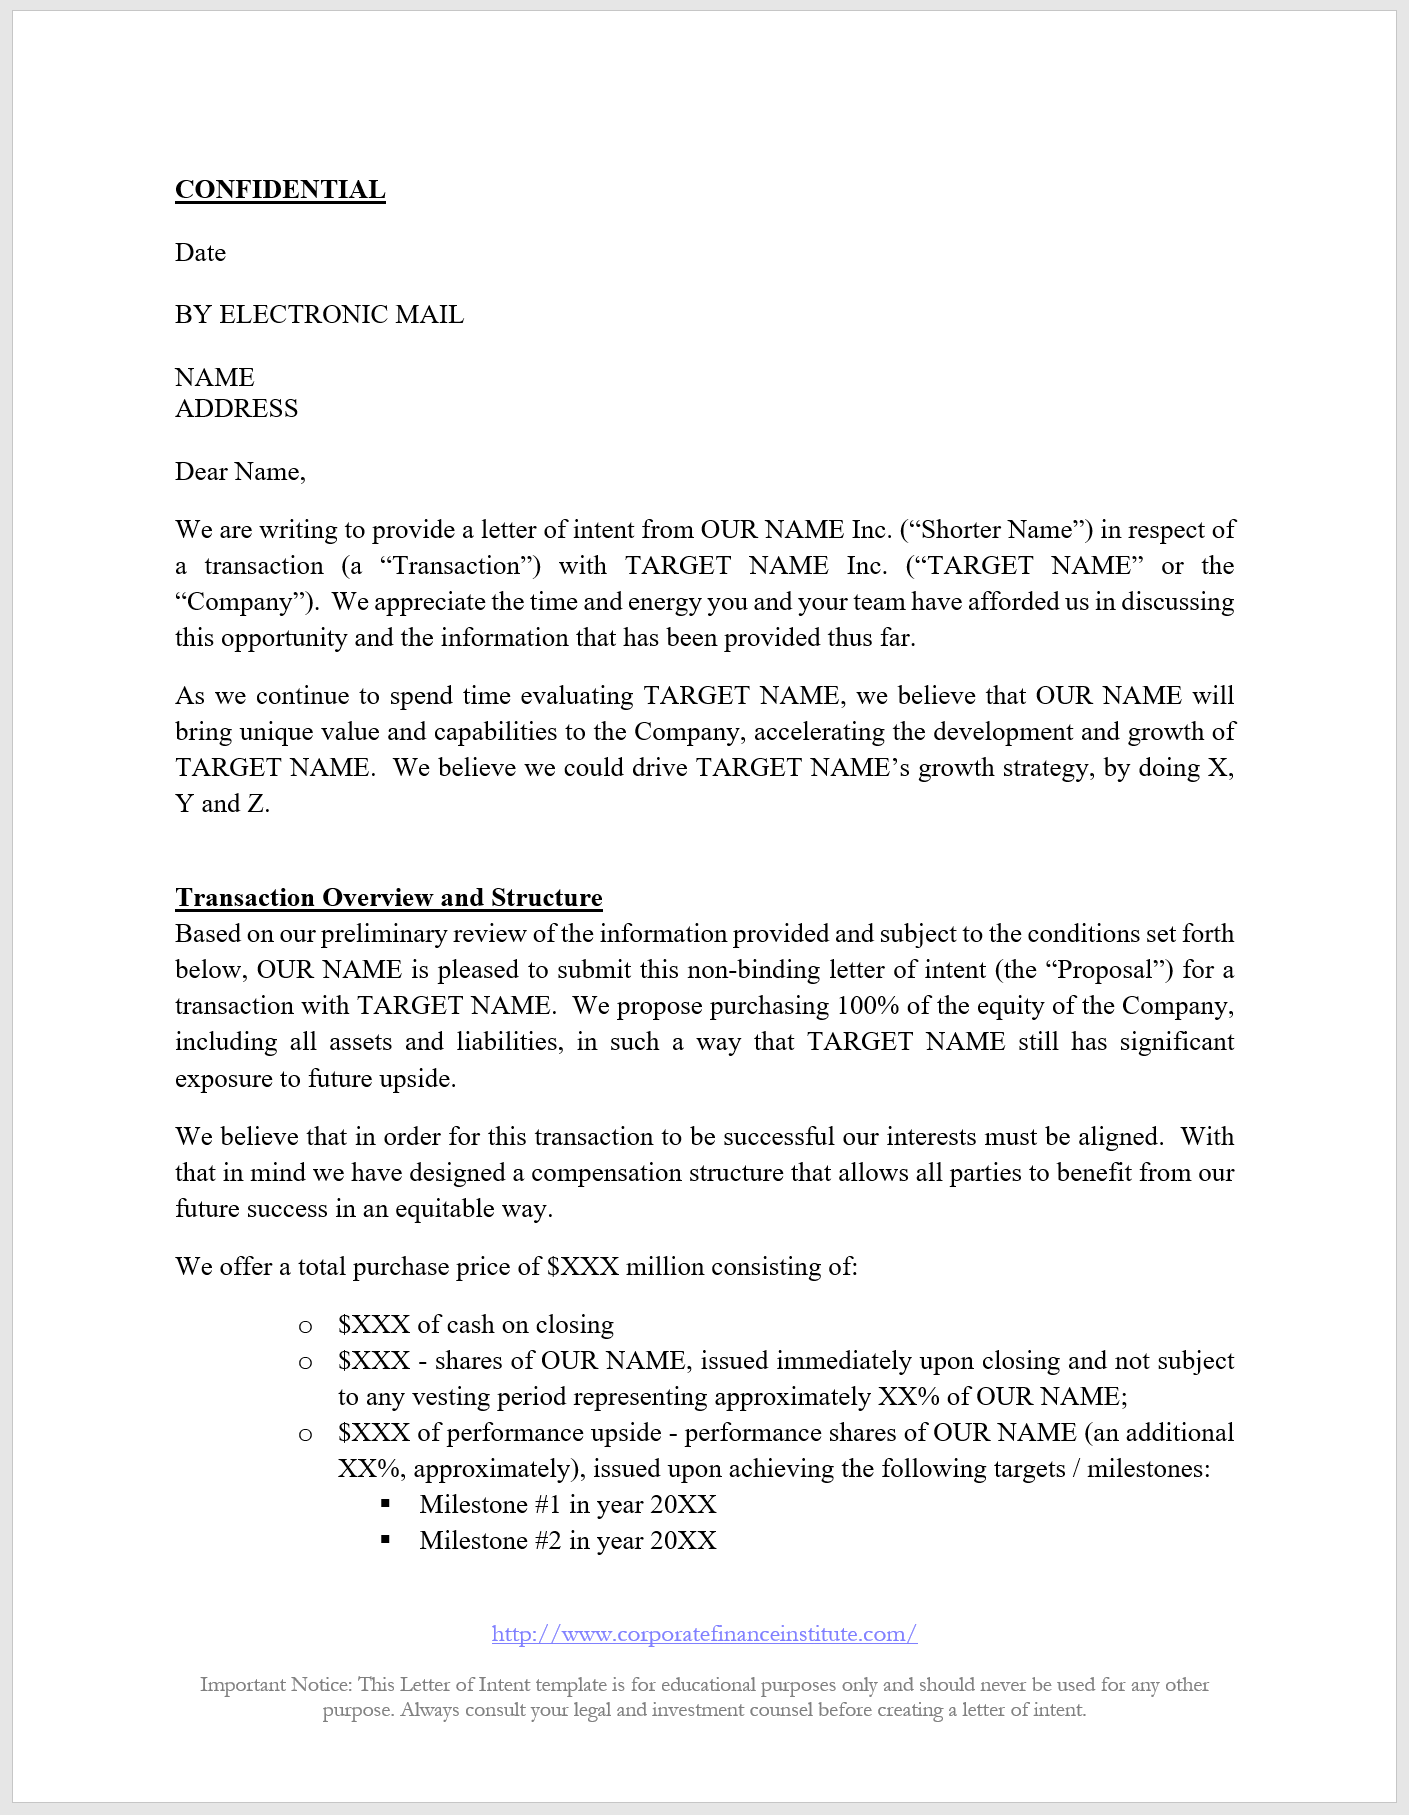 At Will Statement In Offer Letter from corporatefinanceinstitute.com